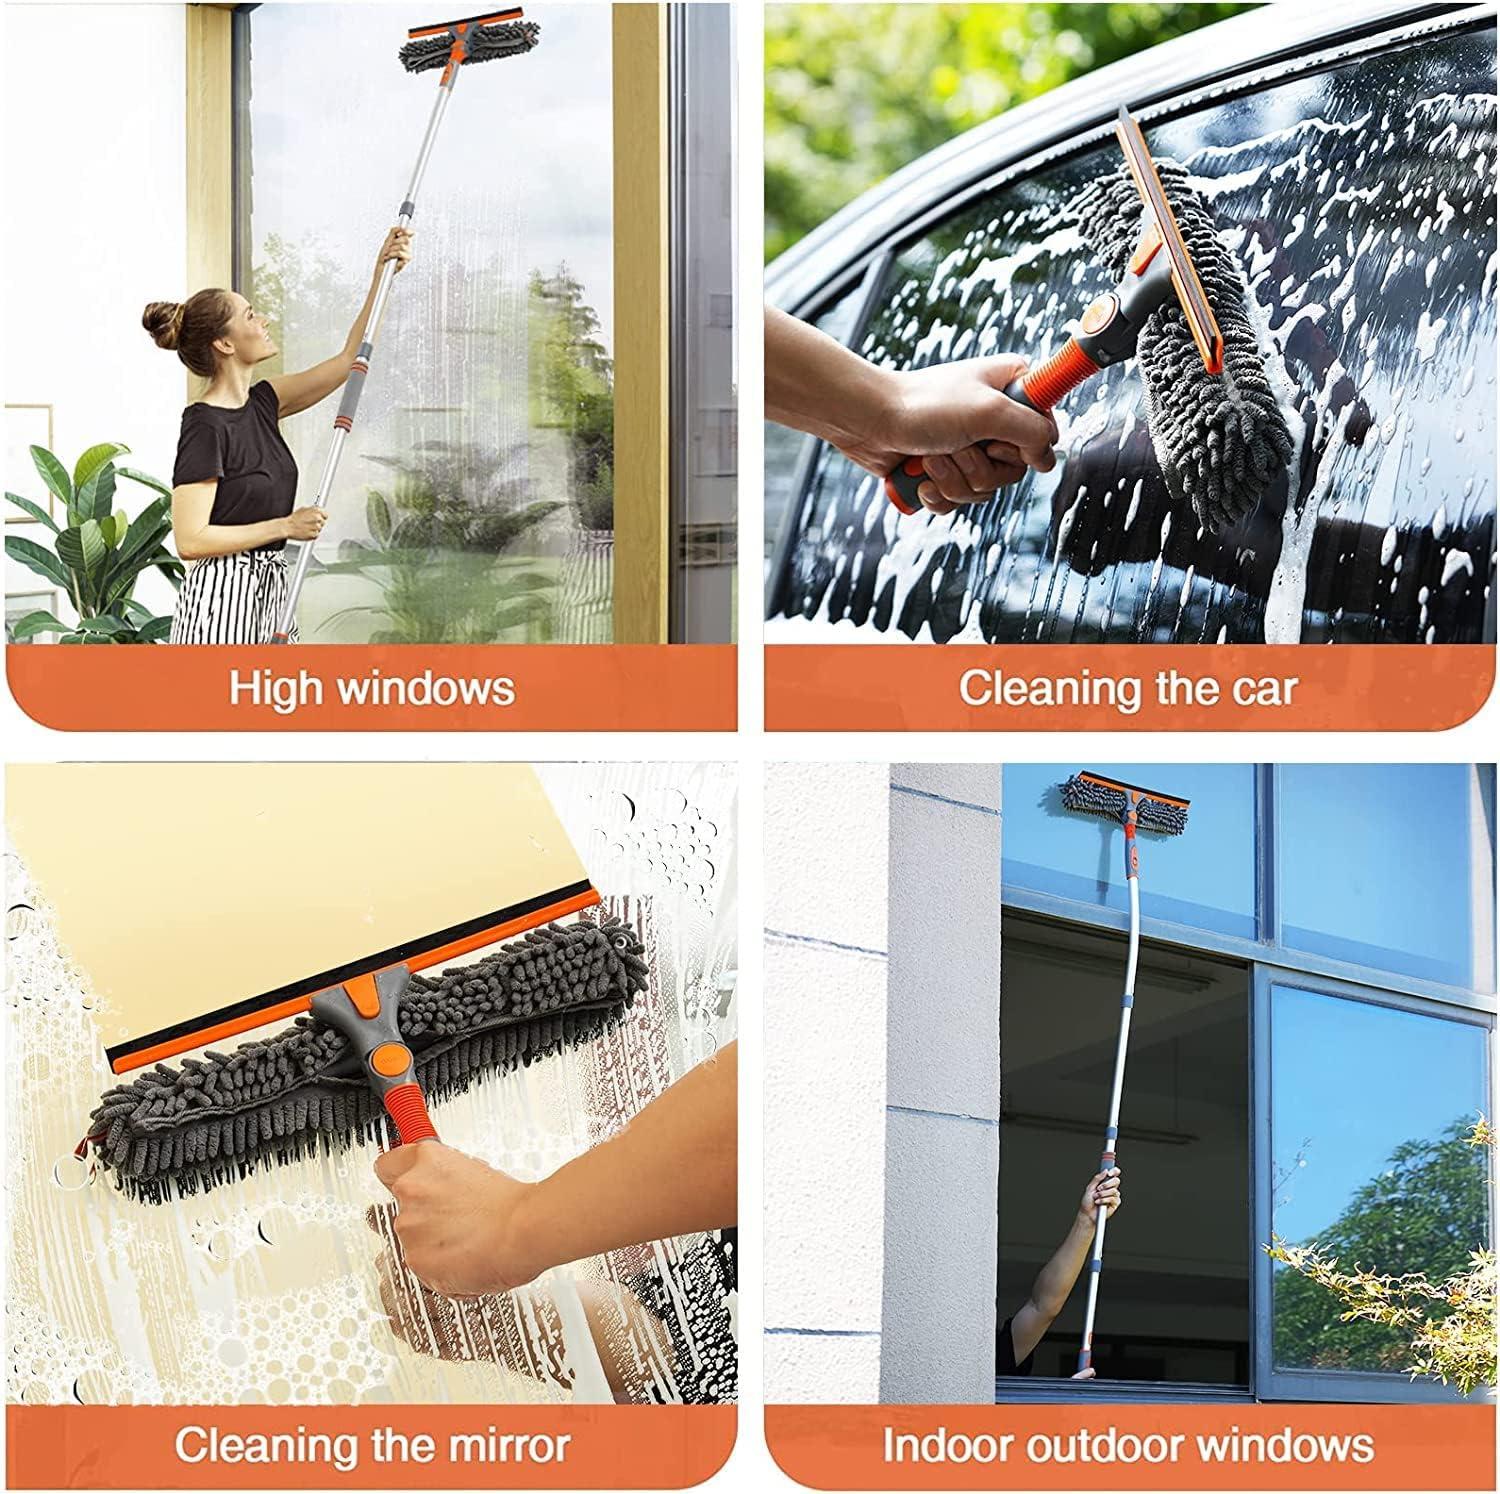  eazer Squeegee Window Cleaner 2 in 1 Rotatable Window Cleaning  Tool Kit with Extension Pole, 62” Telescopic Window Washing Equipment with  Bendable Head for Indoor/Outdoor Car Glass - 4 Pads : Health & Household